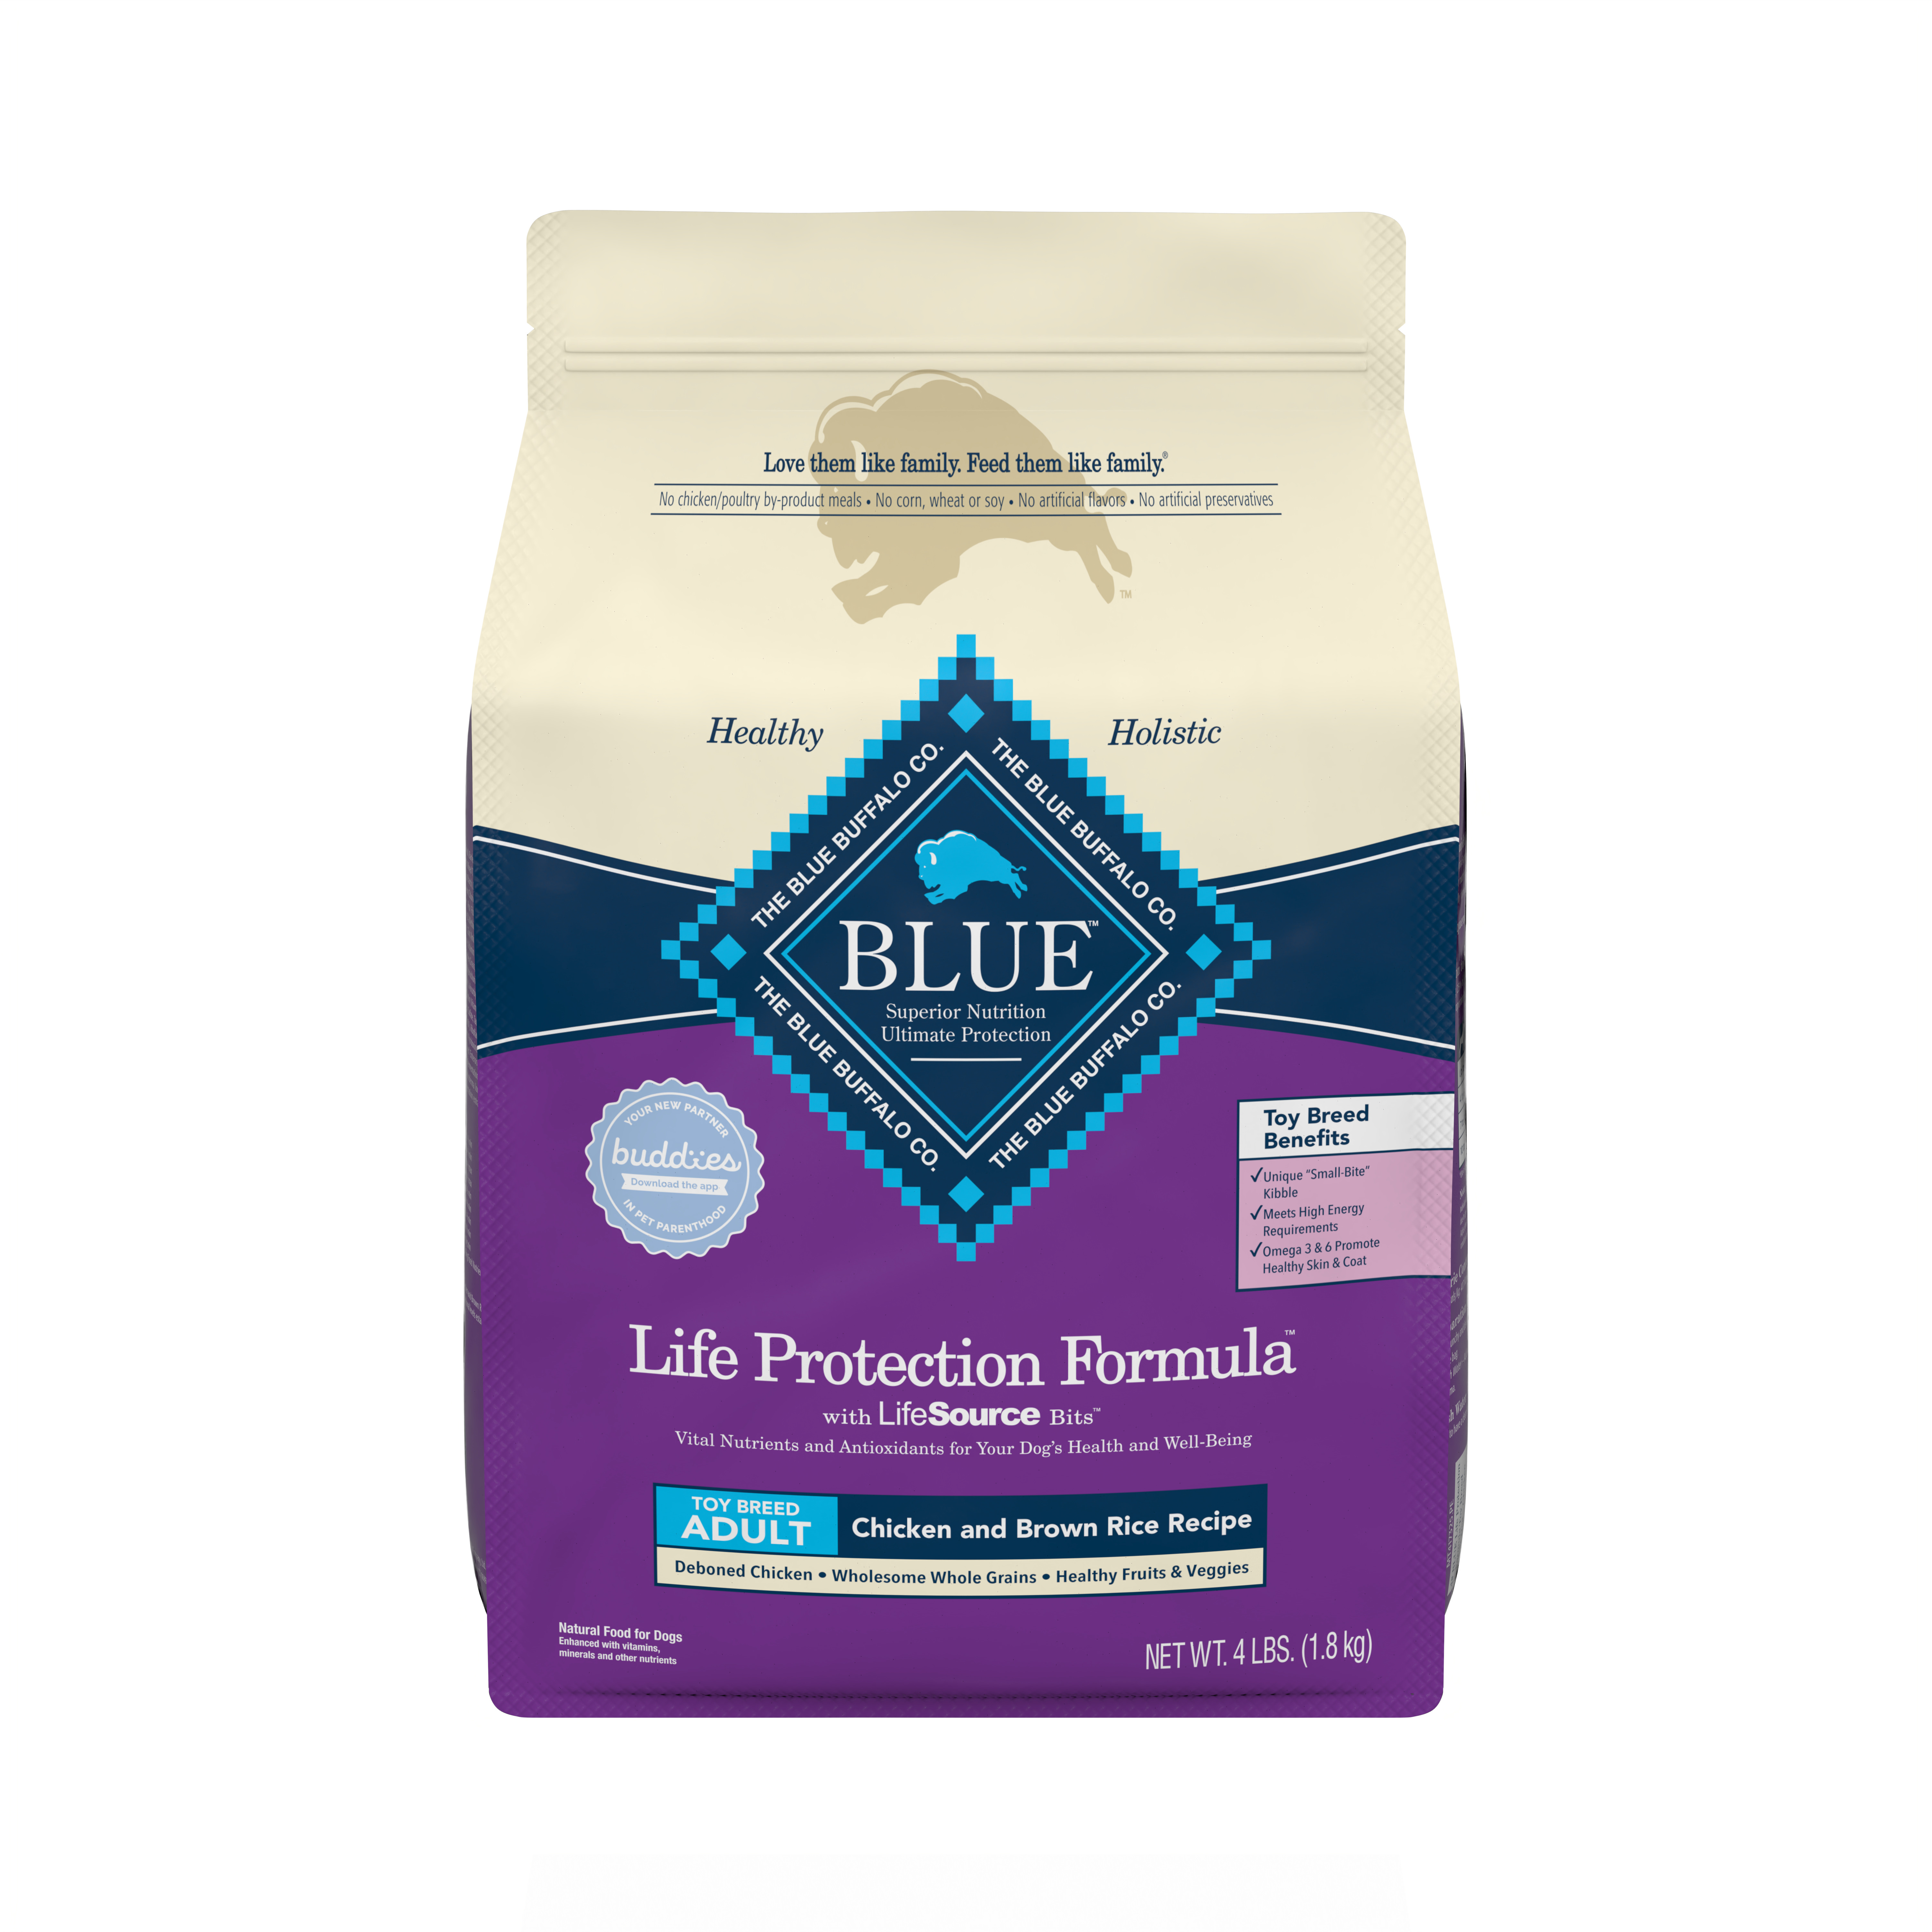 BLUE Life Protection Formula Chicken and Brown Rice Recipe for Toy Breed Adult Dogs, 4 lb